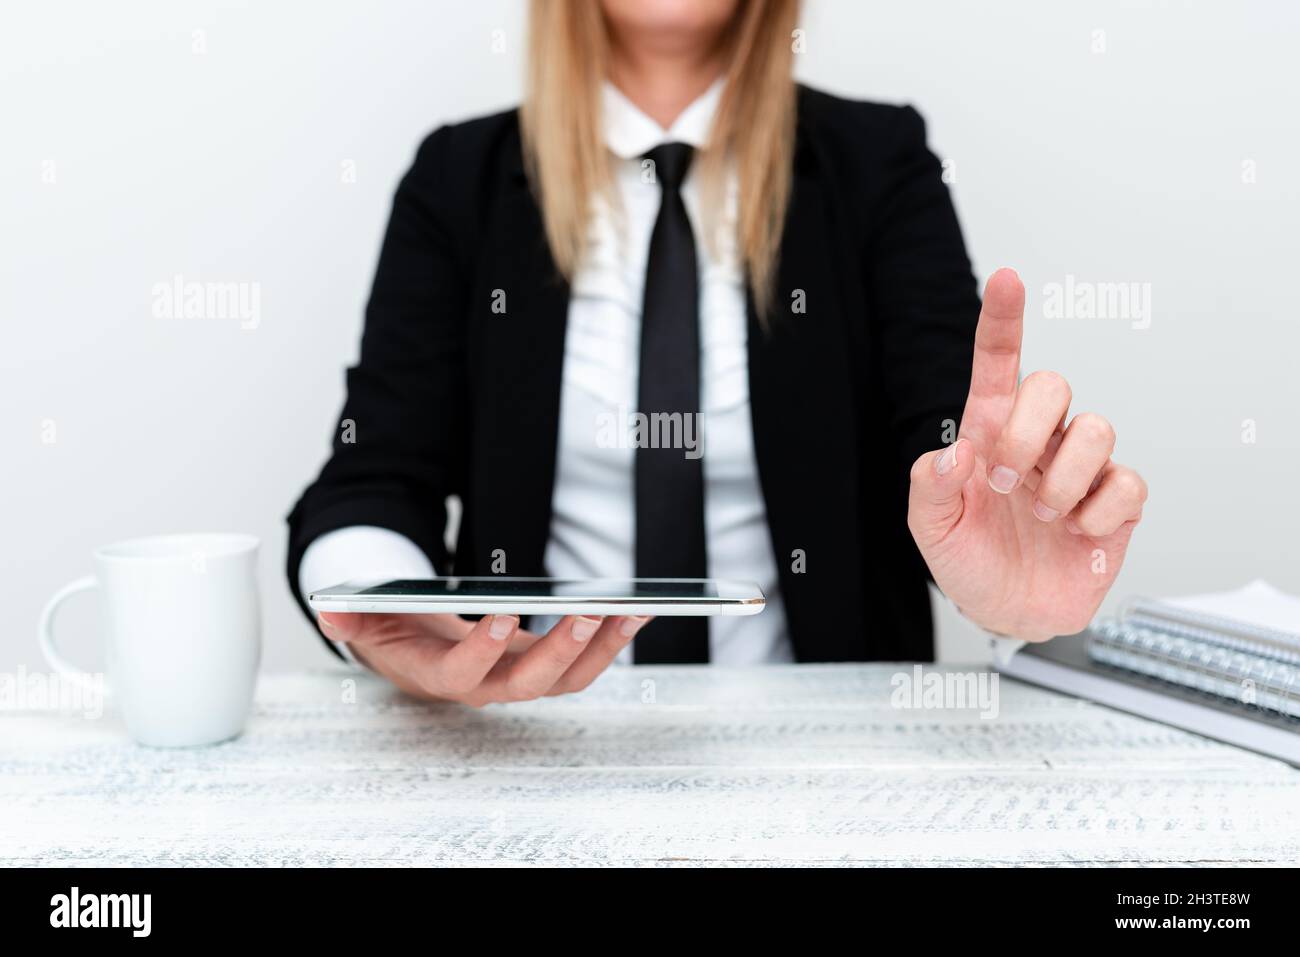 App Developer Presenting New Program, Displaying Upgraded Device, Entrepreneur Presenting Business Ventures, Abstract Discussing Stock Photo